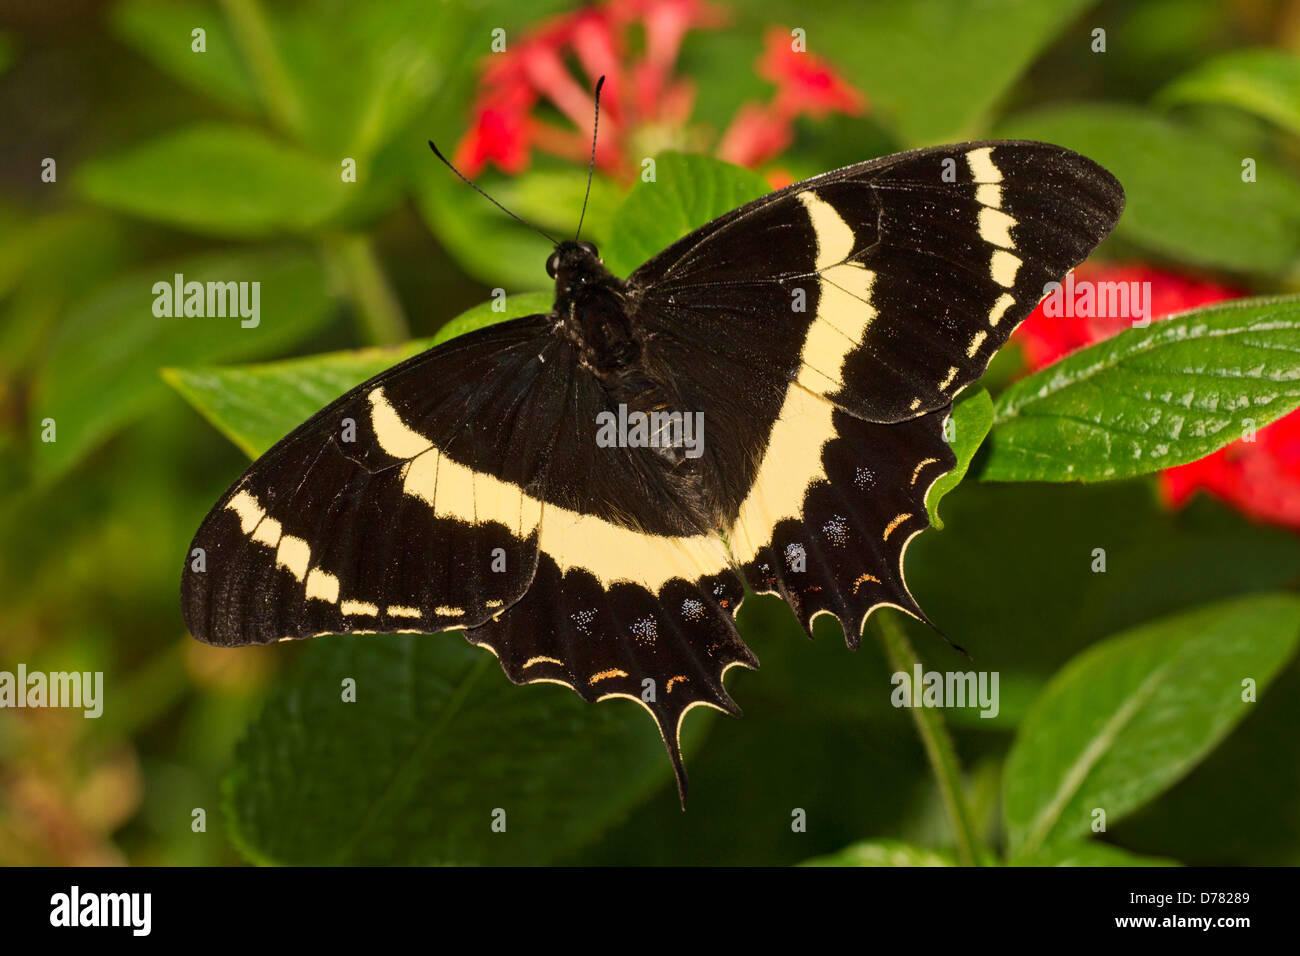 Male magnificent swallowtail butterfly papilio garamas perched on red pentas Stock Photo